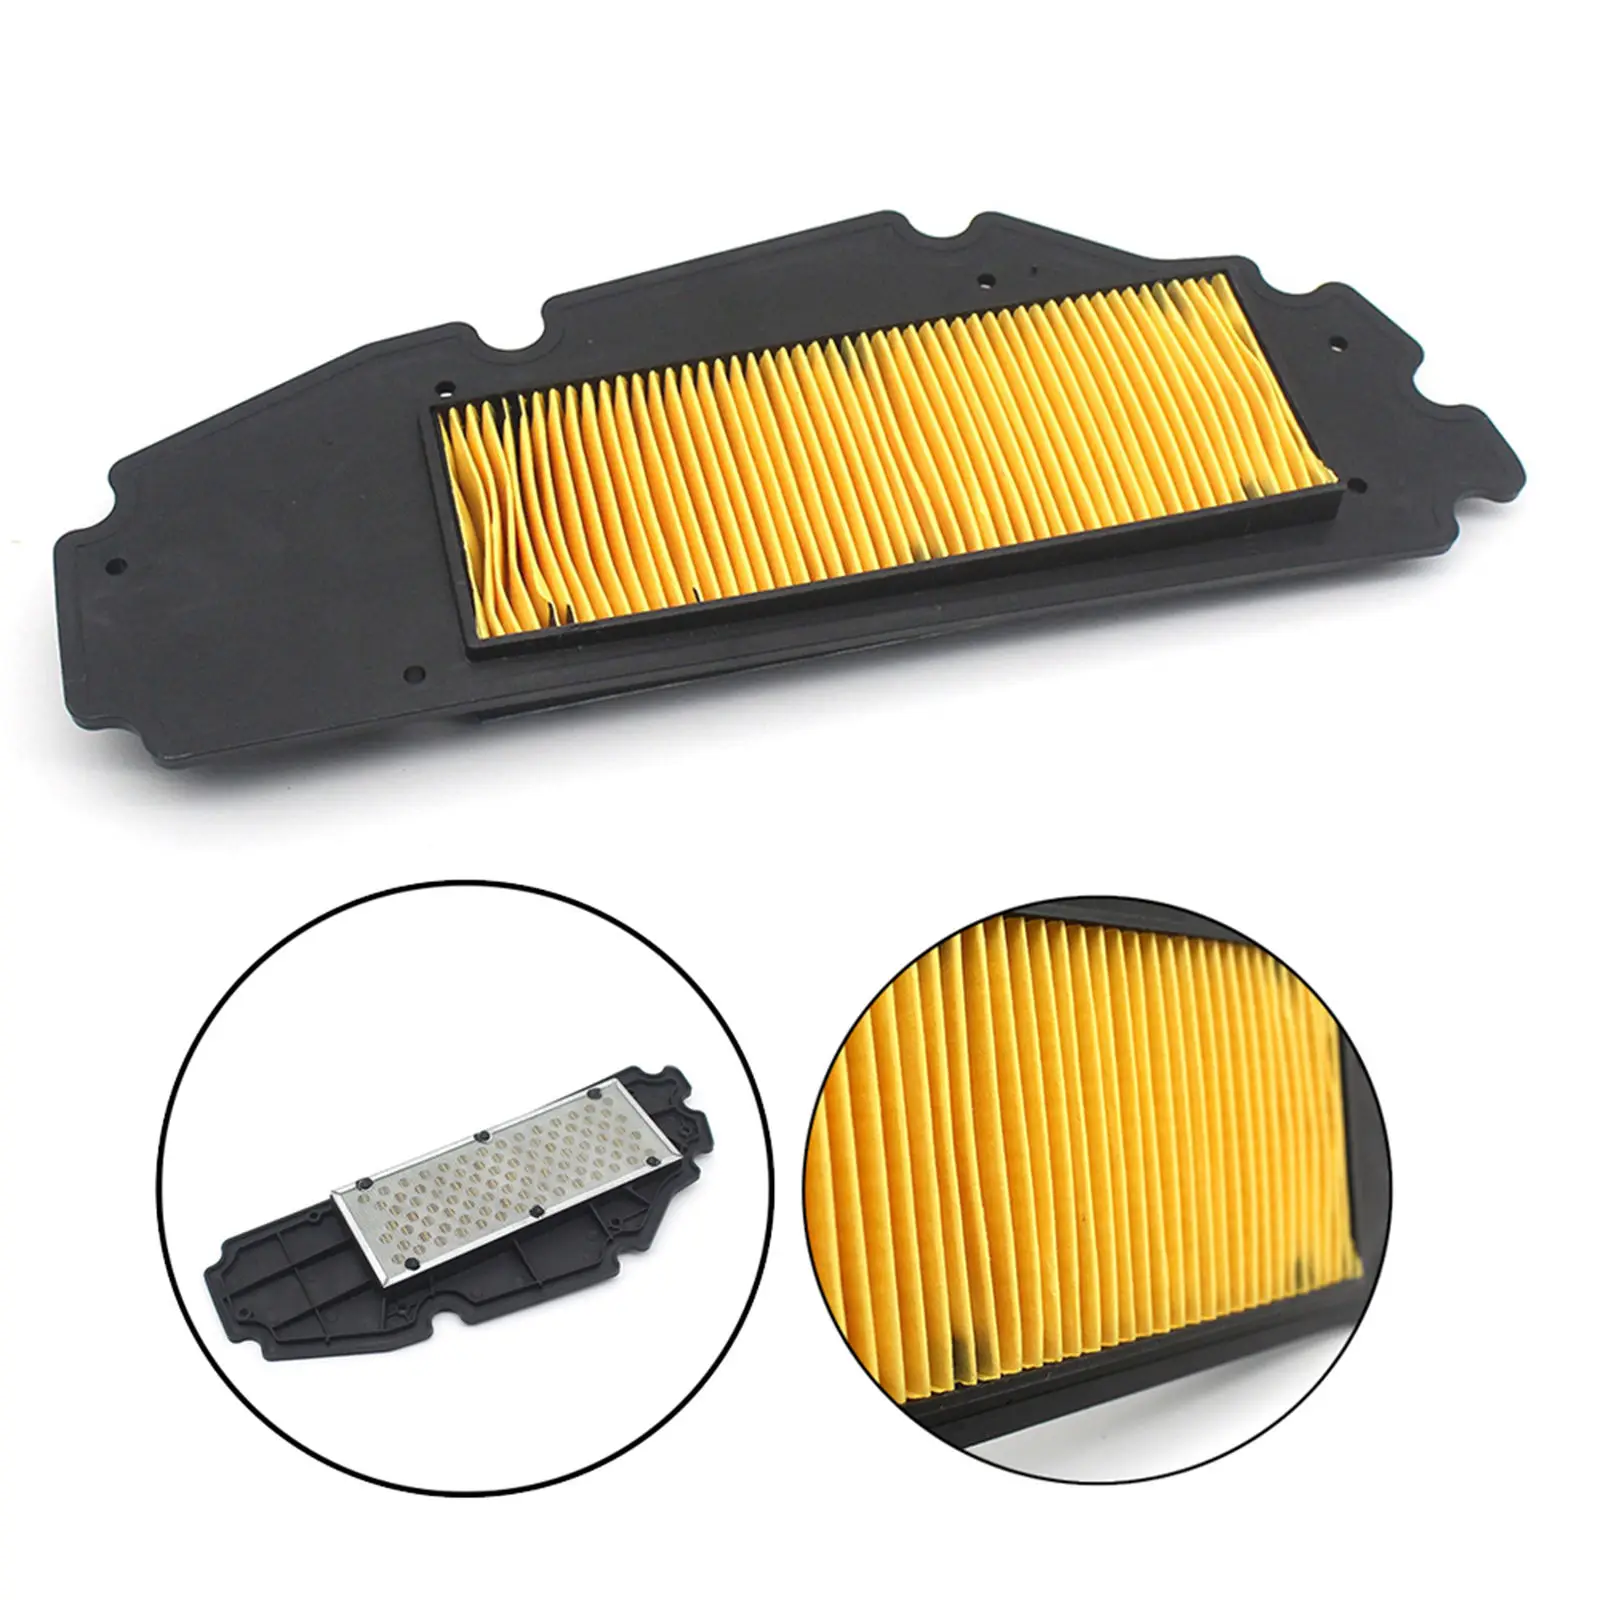 1pc Motorcycle Engine Air Filter Replacement Filter, for SYM JOYMAX Z300 GTS300i RV250 CRUISYM300i